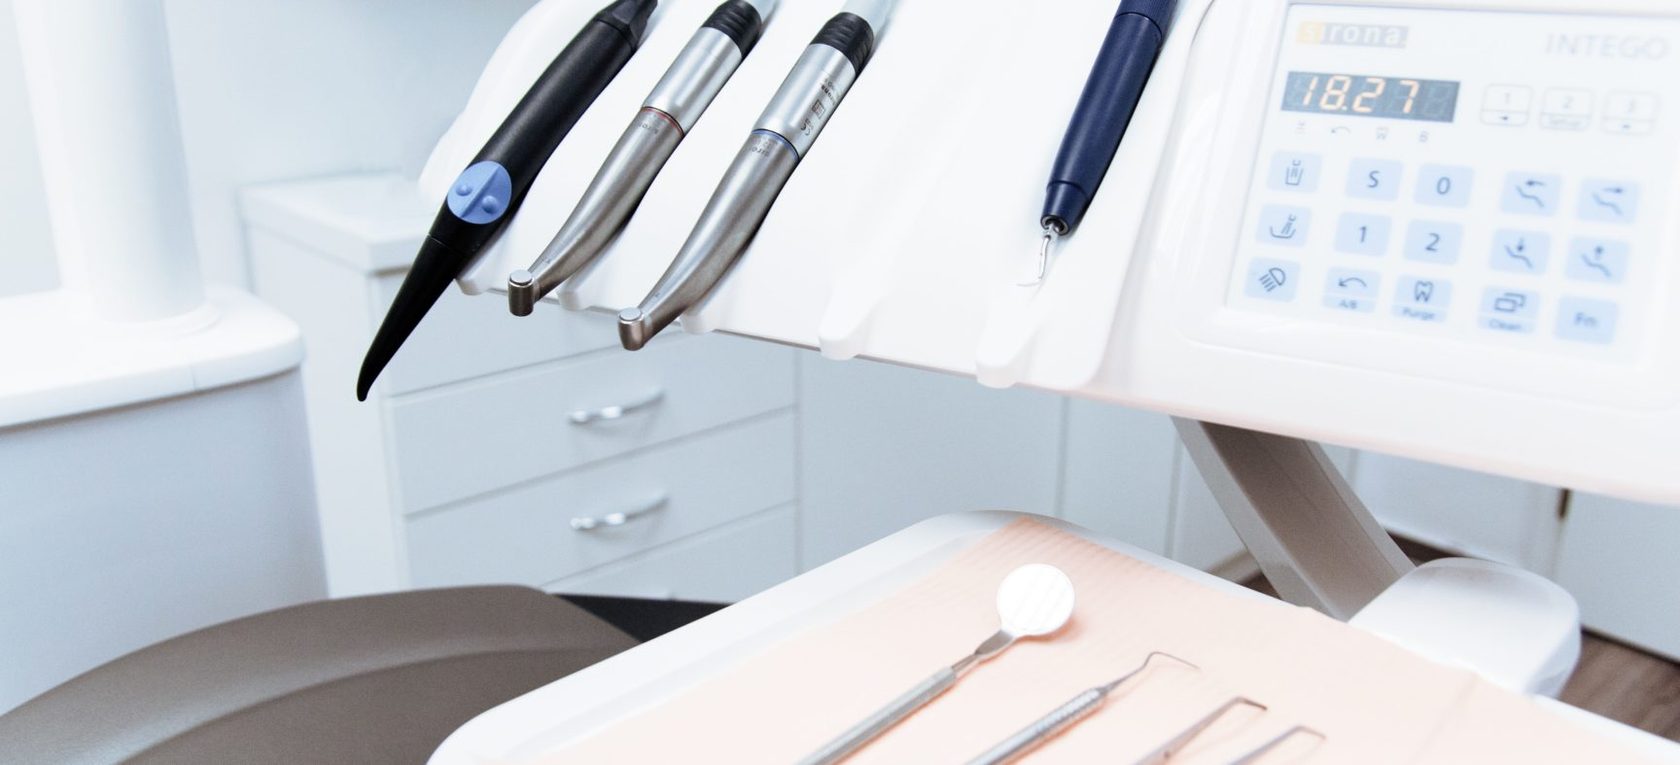 Rating of the best dental micromotors for 2020